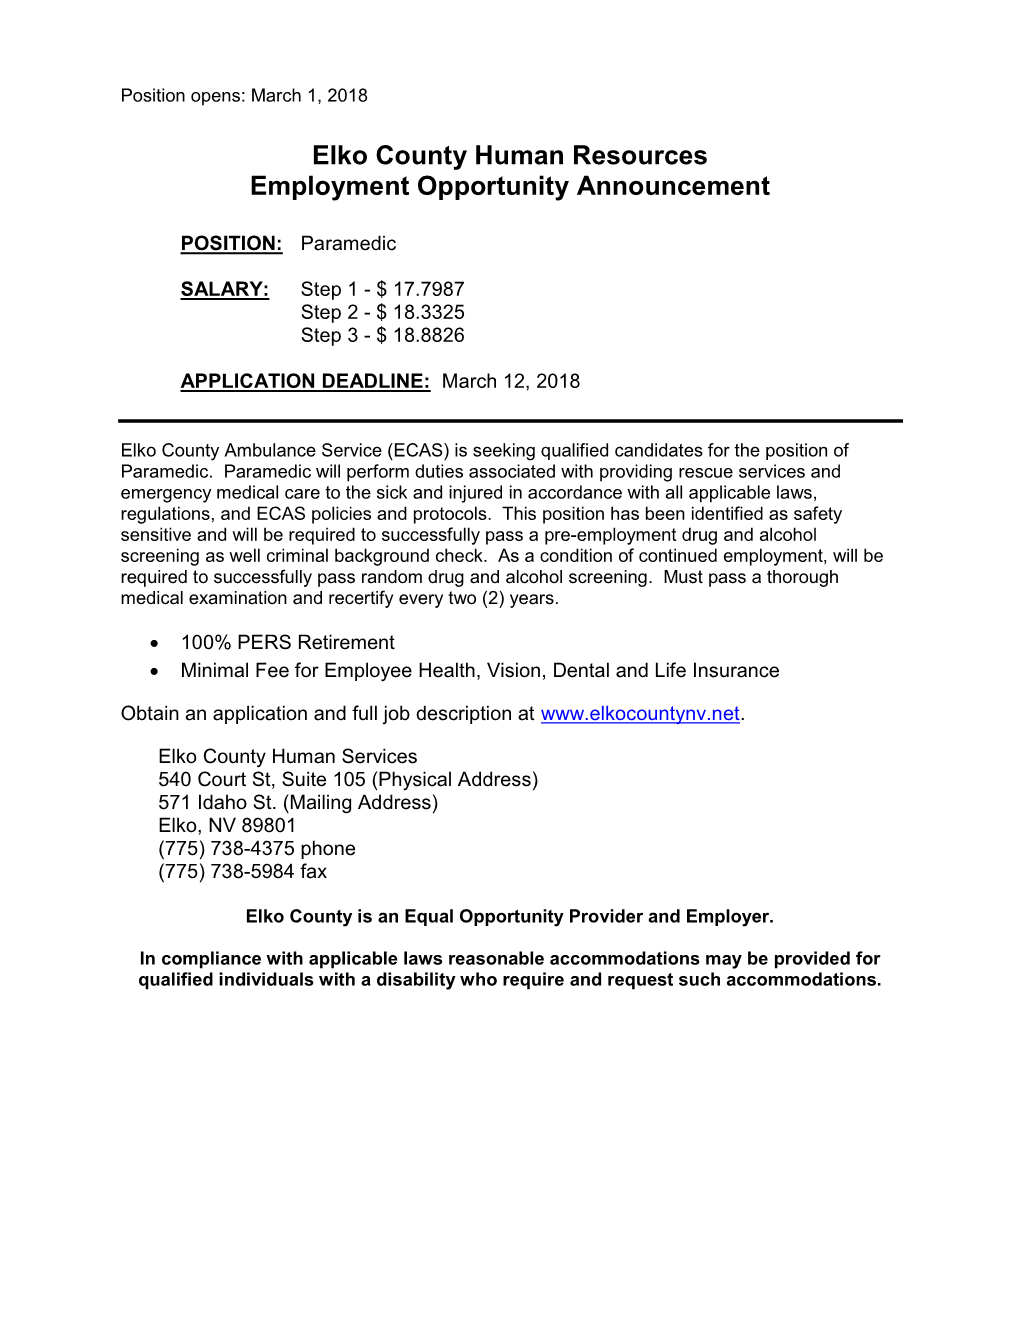 Elko County Human Resources Employment Opportunity Announcement